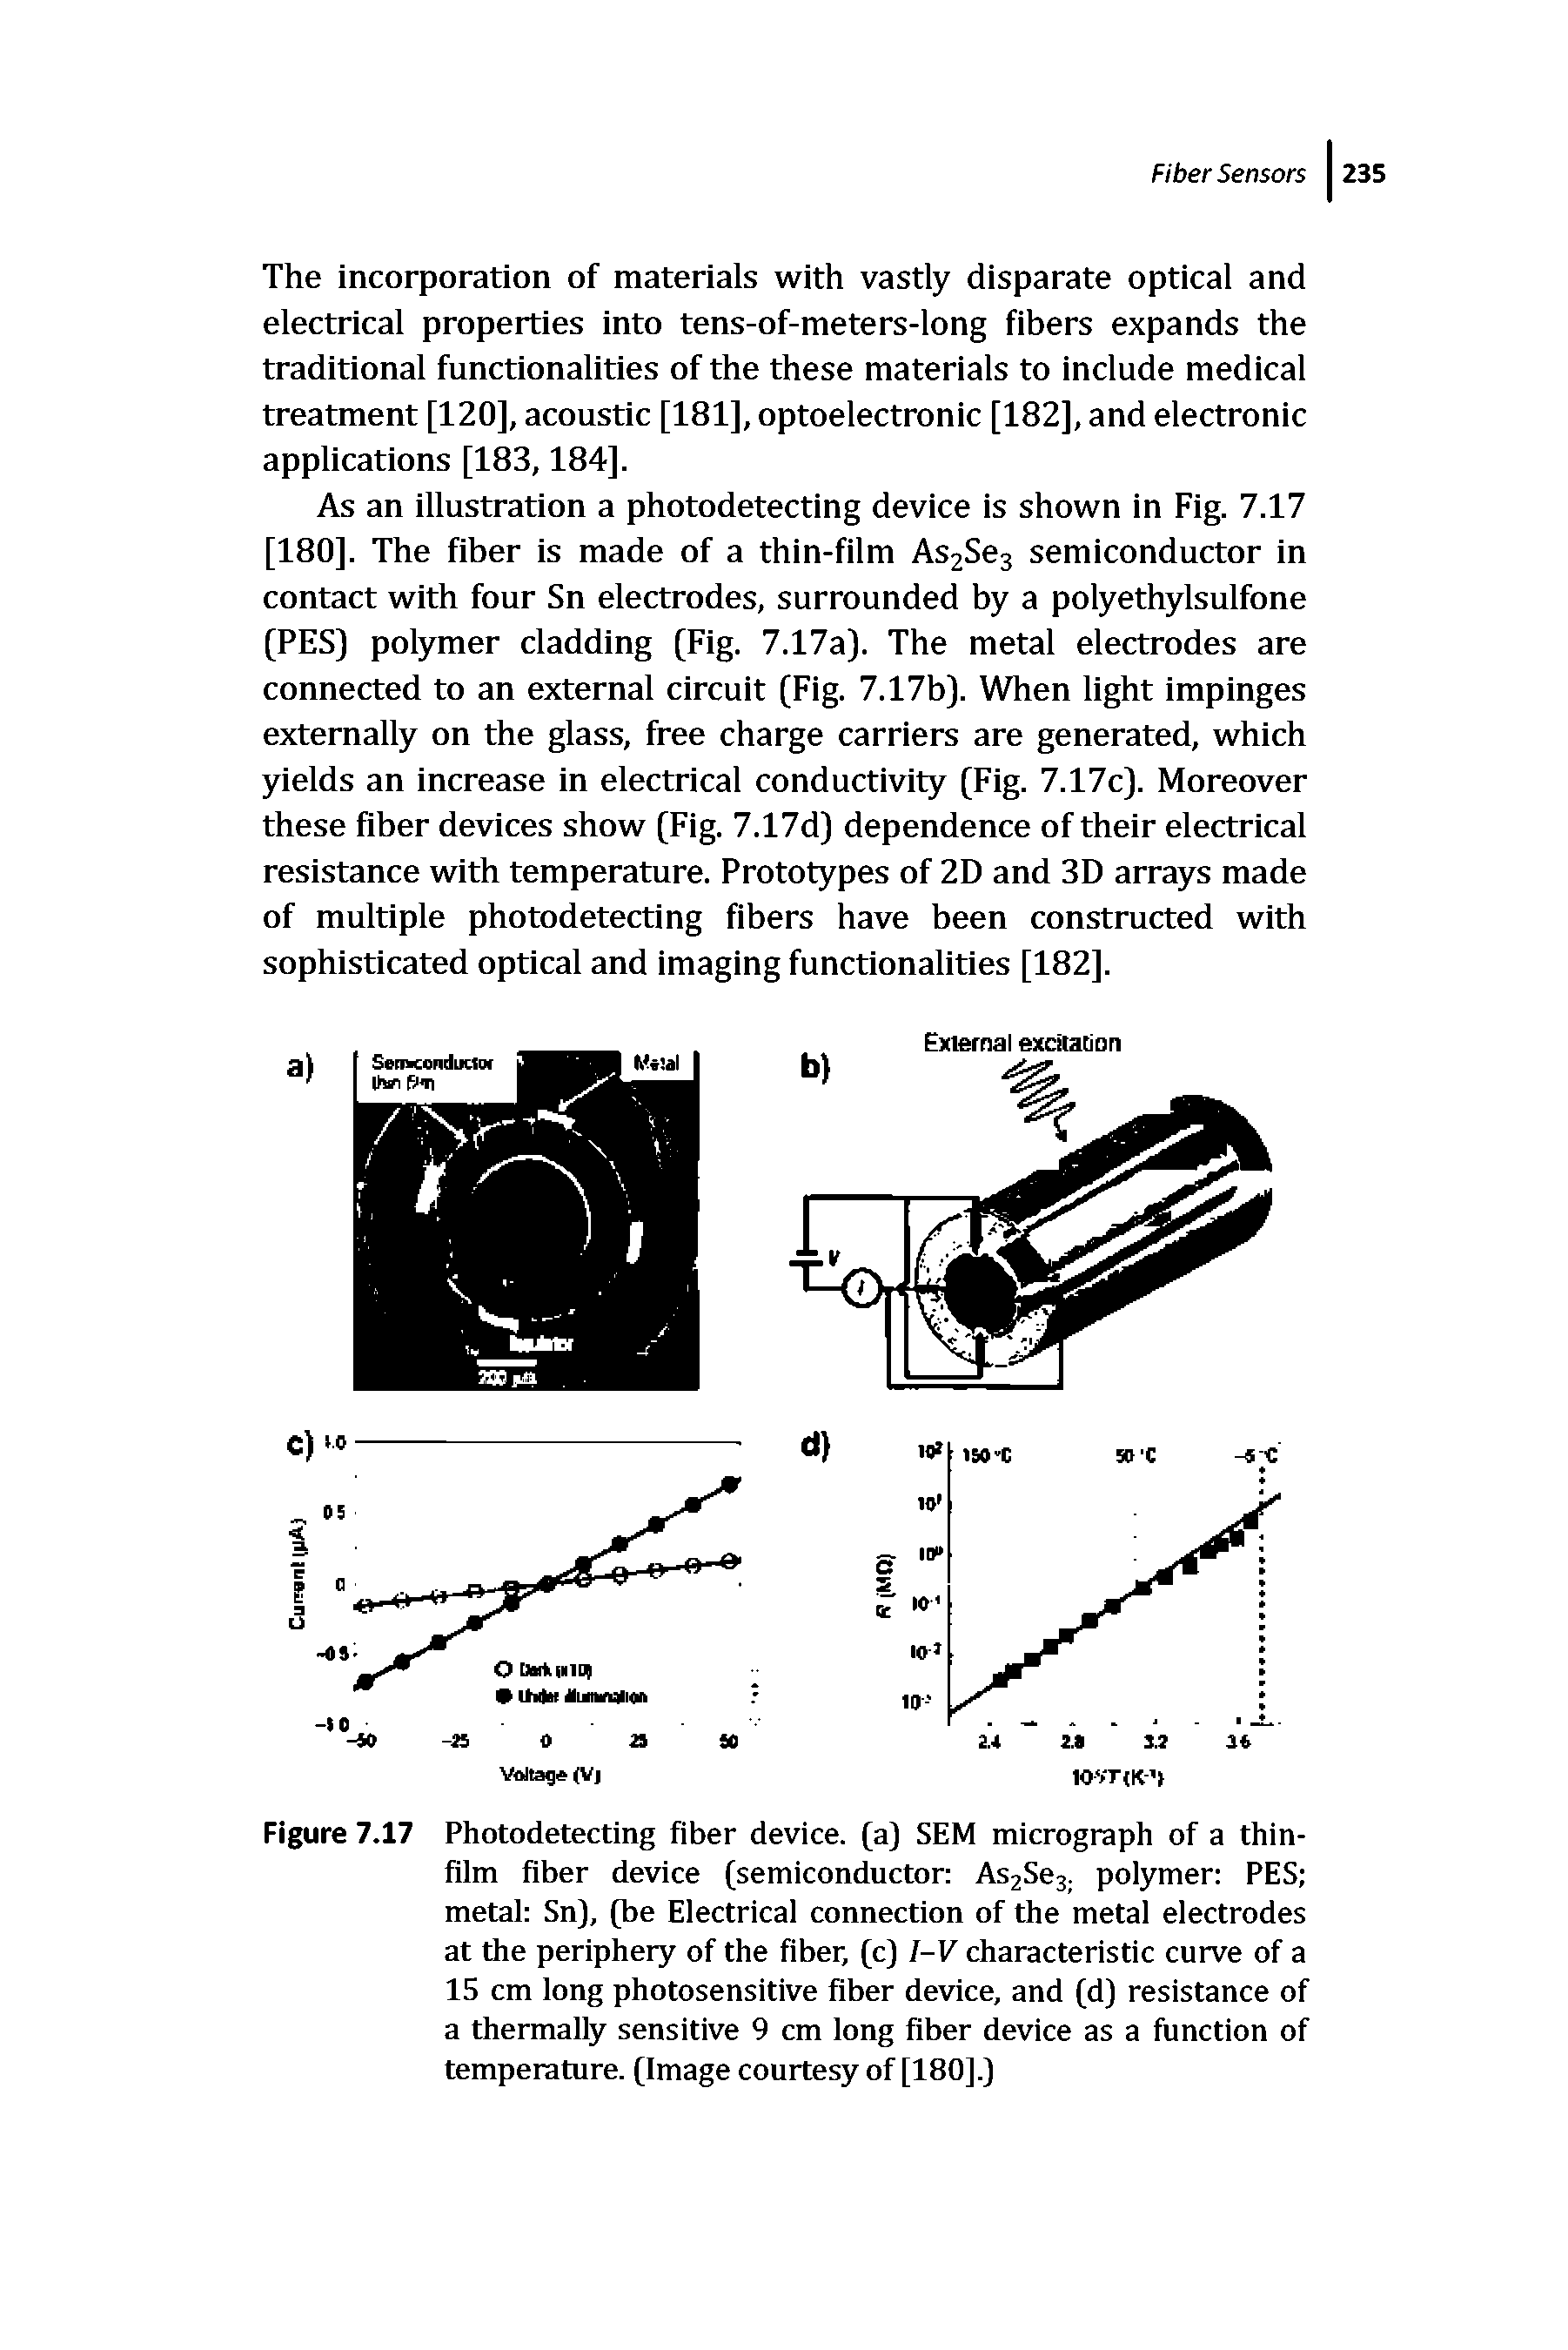 Figure 7.17 Photodetecting fiber device, (a) SEM micrograph of a thin-film fiber device (semiconductor As2Se3. polymer PES metal Sn), (be Electrical connection of the metal electrodes at the periphery of the fiber, (c) I-V characteristic curve of a 15 cm long photosensitive fiber device, and (d) resistance of a thermally sensitive 9 cm long fiber device as a function of temperature. (Image courtesy of [180].)...